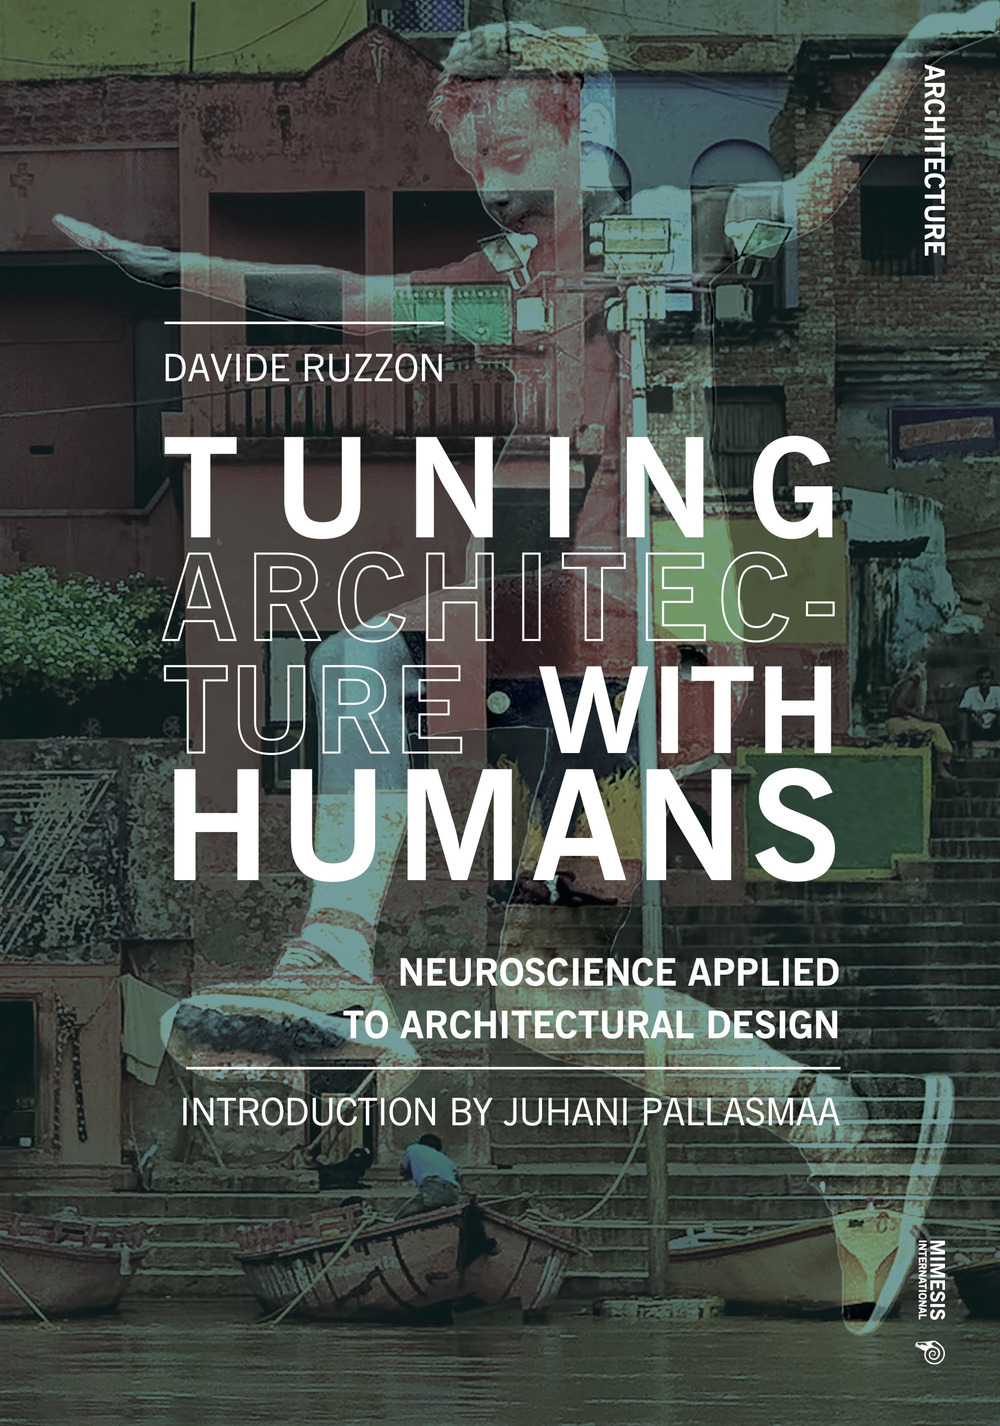 Tuning architecture with humans. Neuroscience applied to architectural design